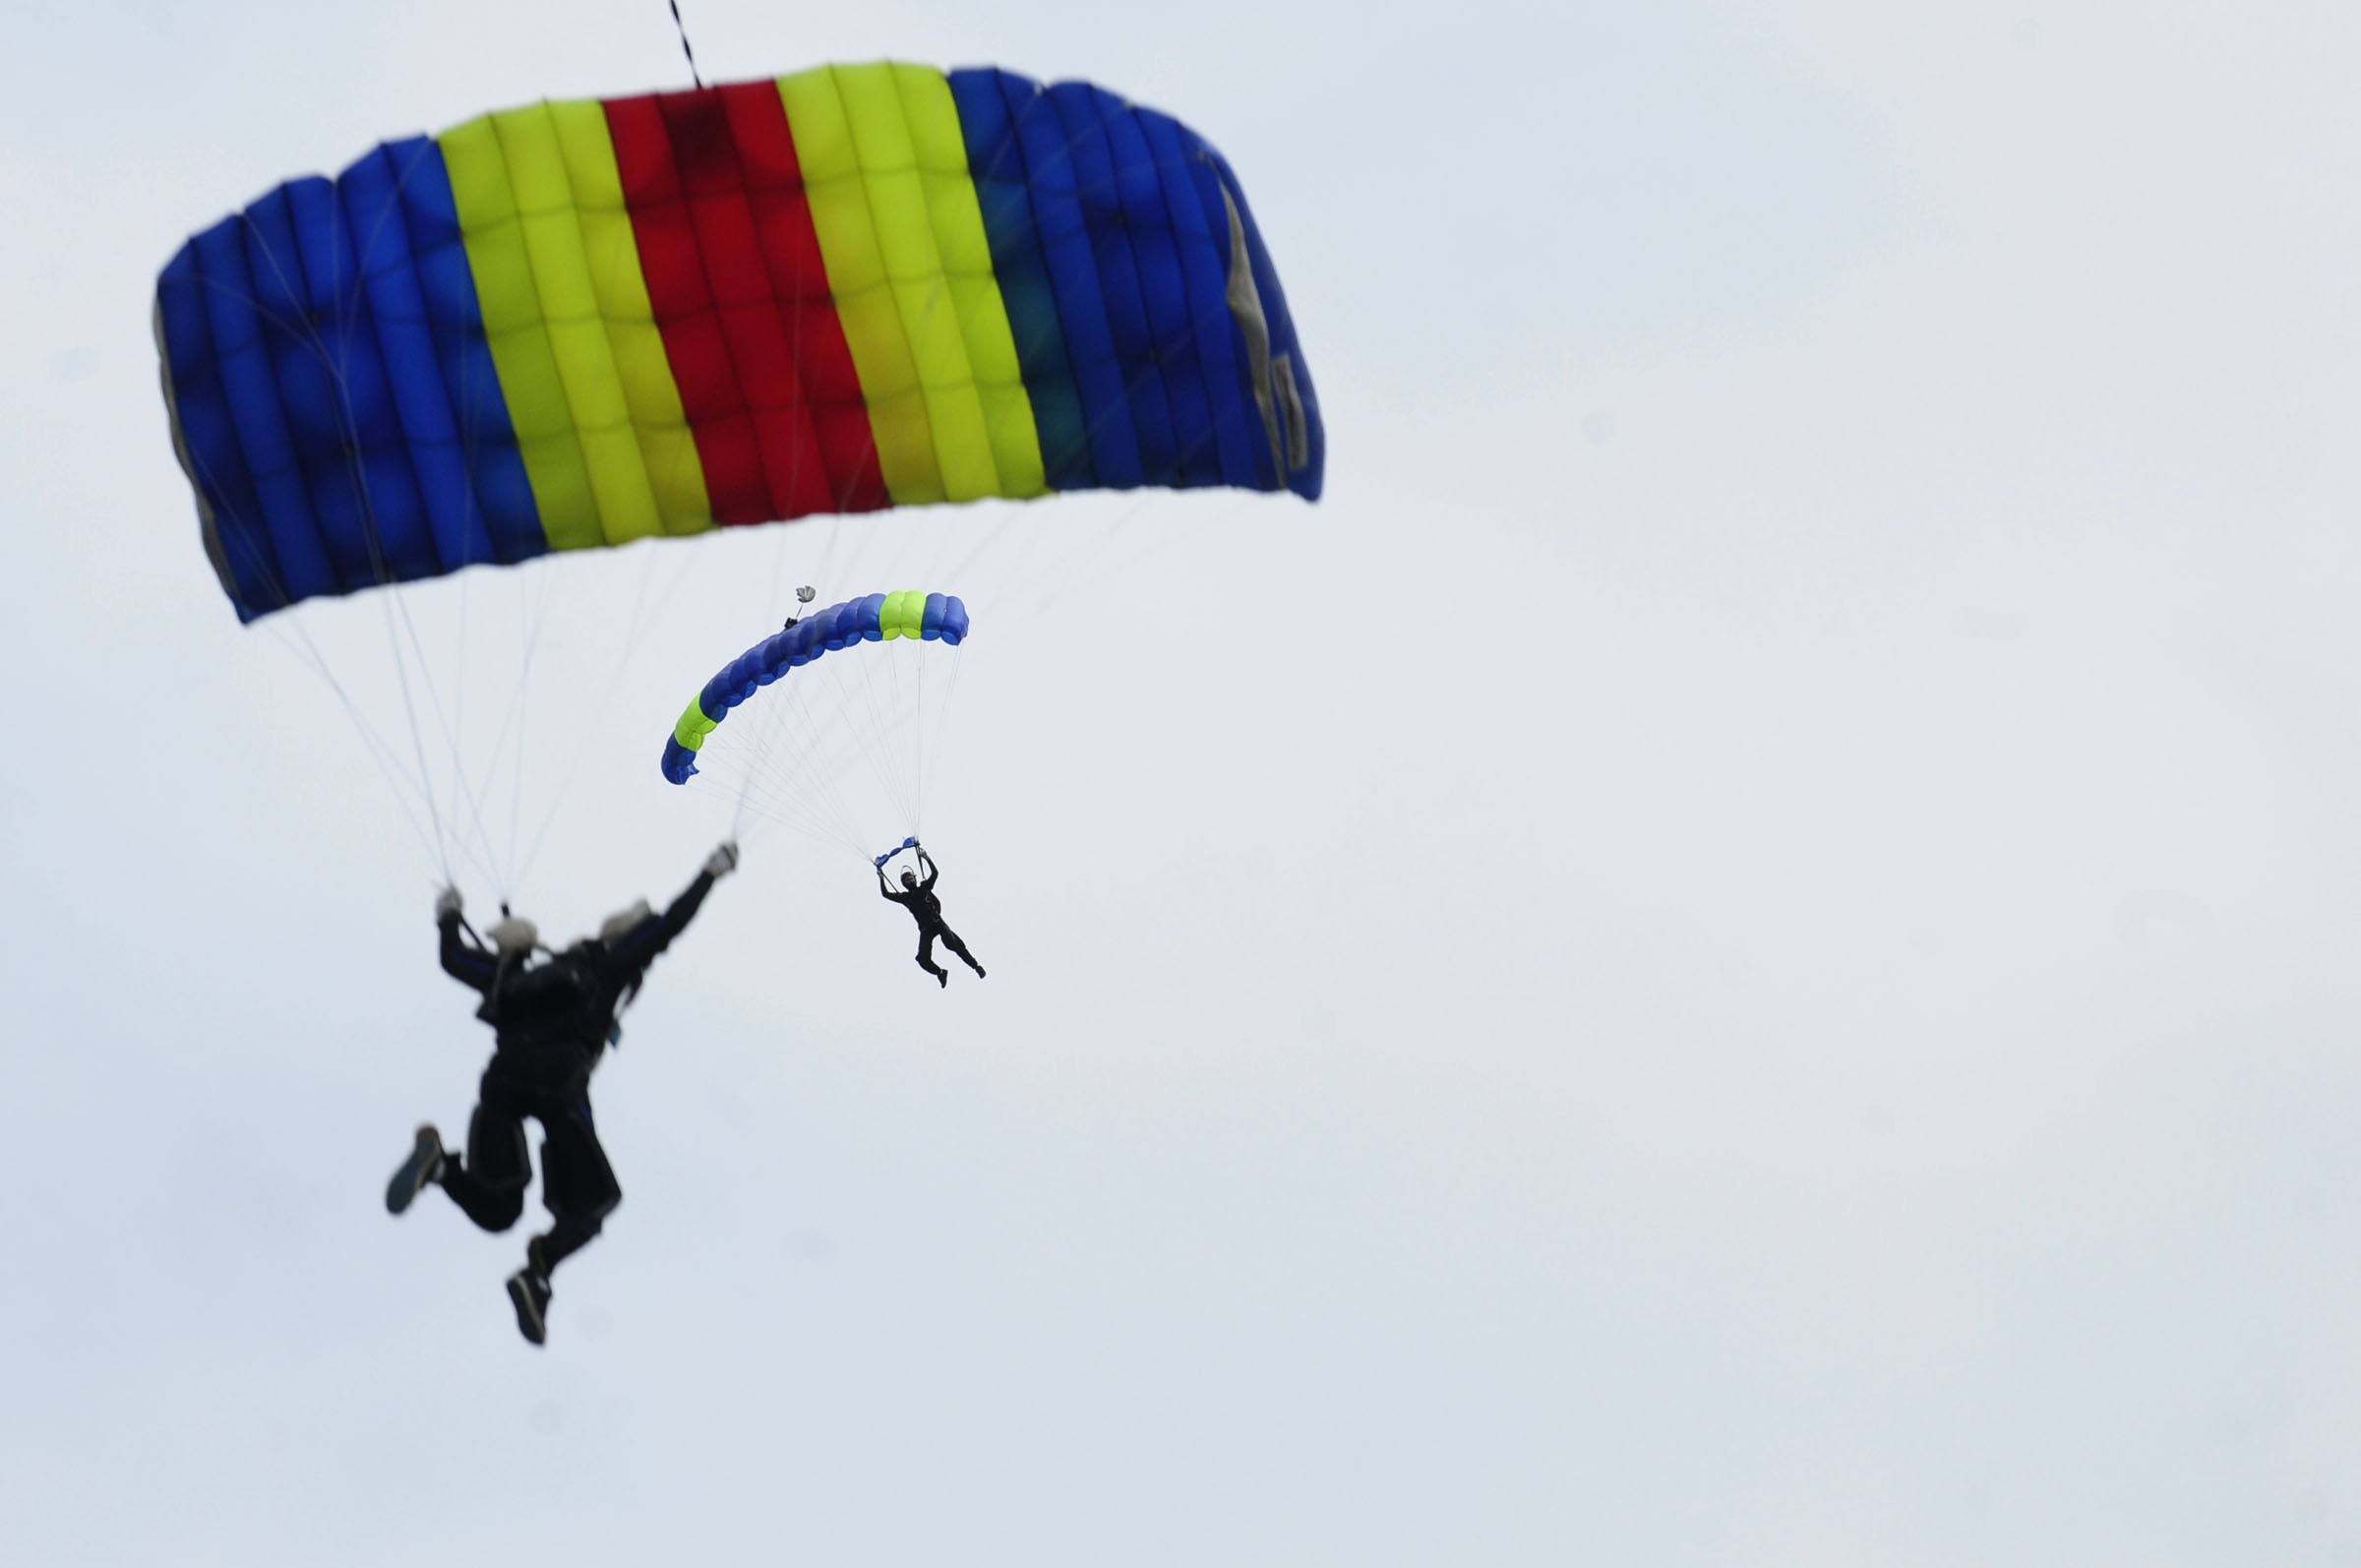 Skydivers from all over Alberta made their way to the Innisfail airport this past weekend to compete in the Alberta Provincial Championships hosted by Skydive Big Sky.